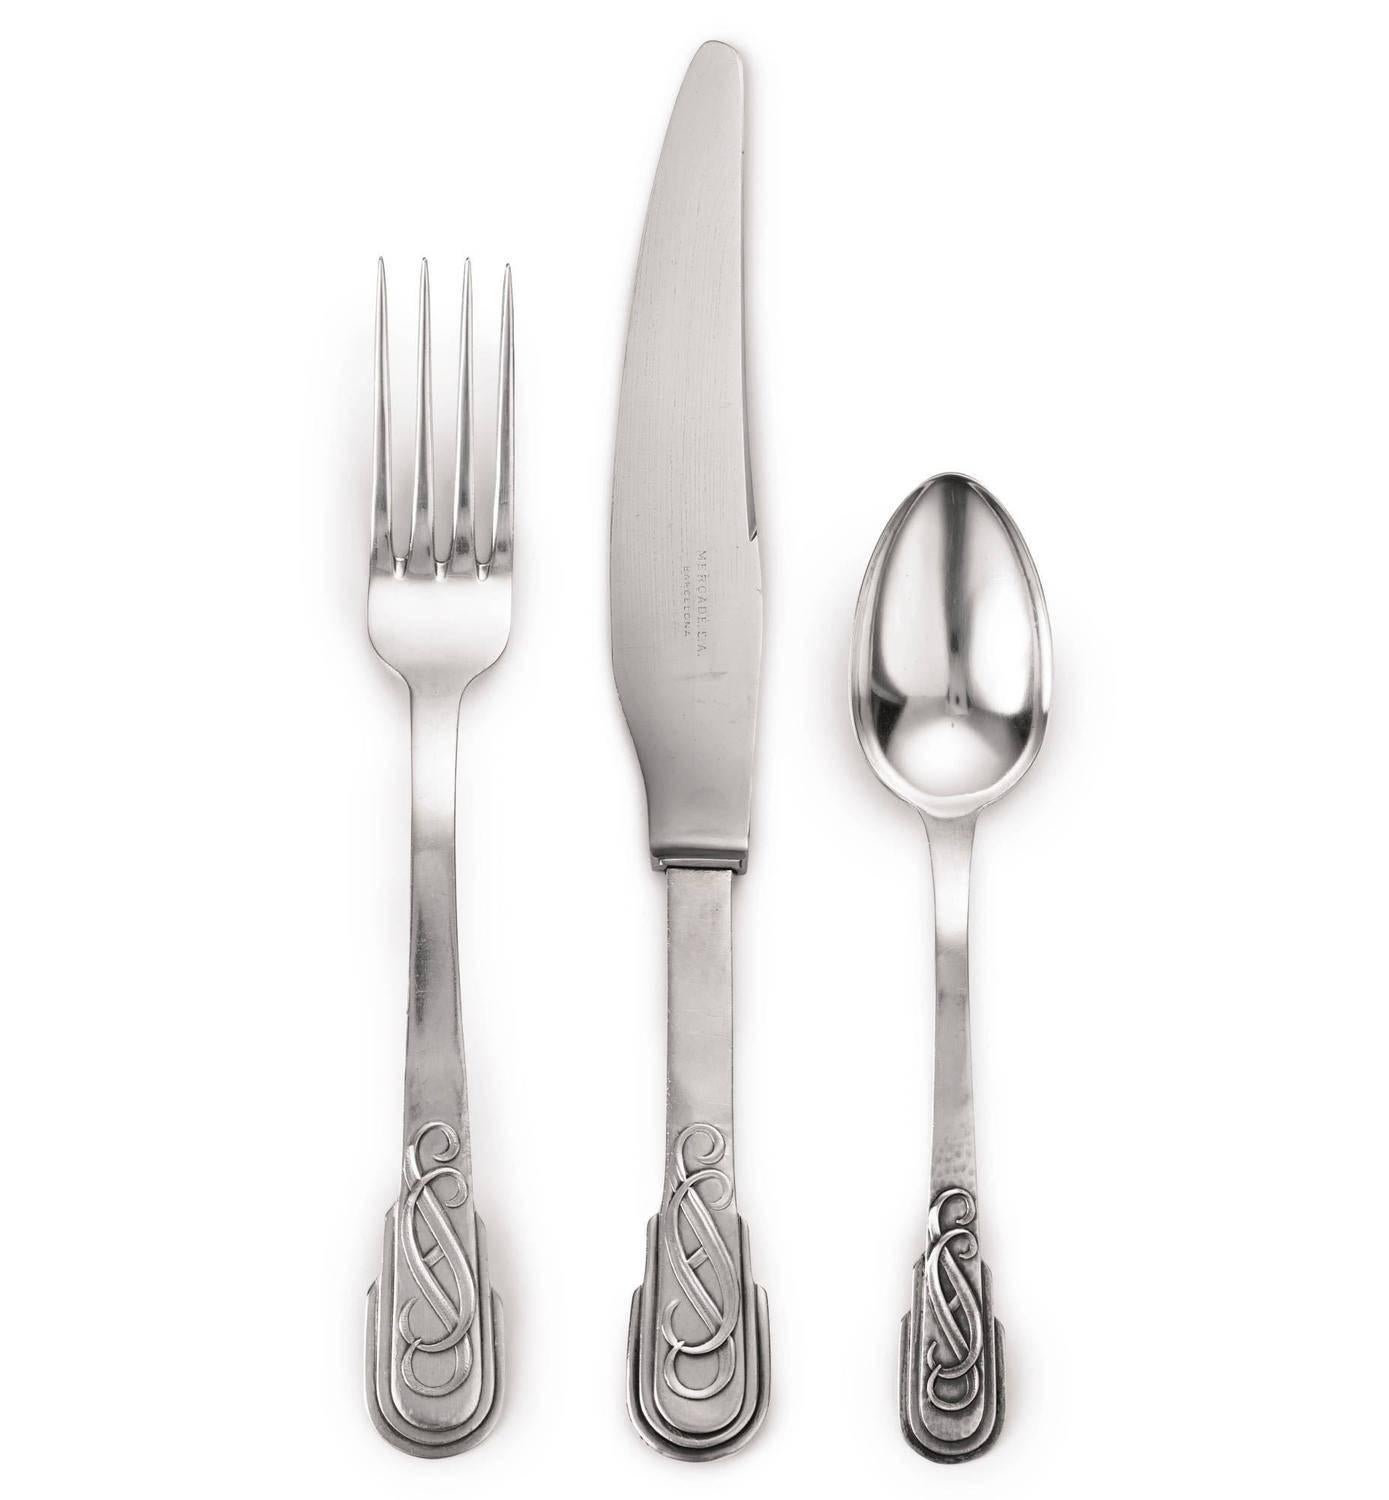 Antique Art Deco Jaume Mercade Queralt solid .916 silver handmade 196 piece flatware set that serves 12. The set is complete without a single missing piece. It is in excellent condition, just perfect with a lovely patina. The entire set is